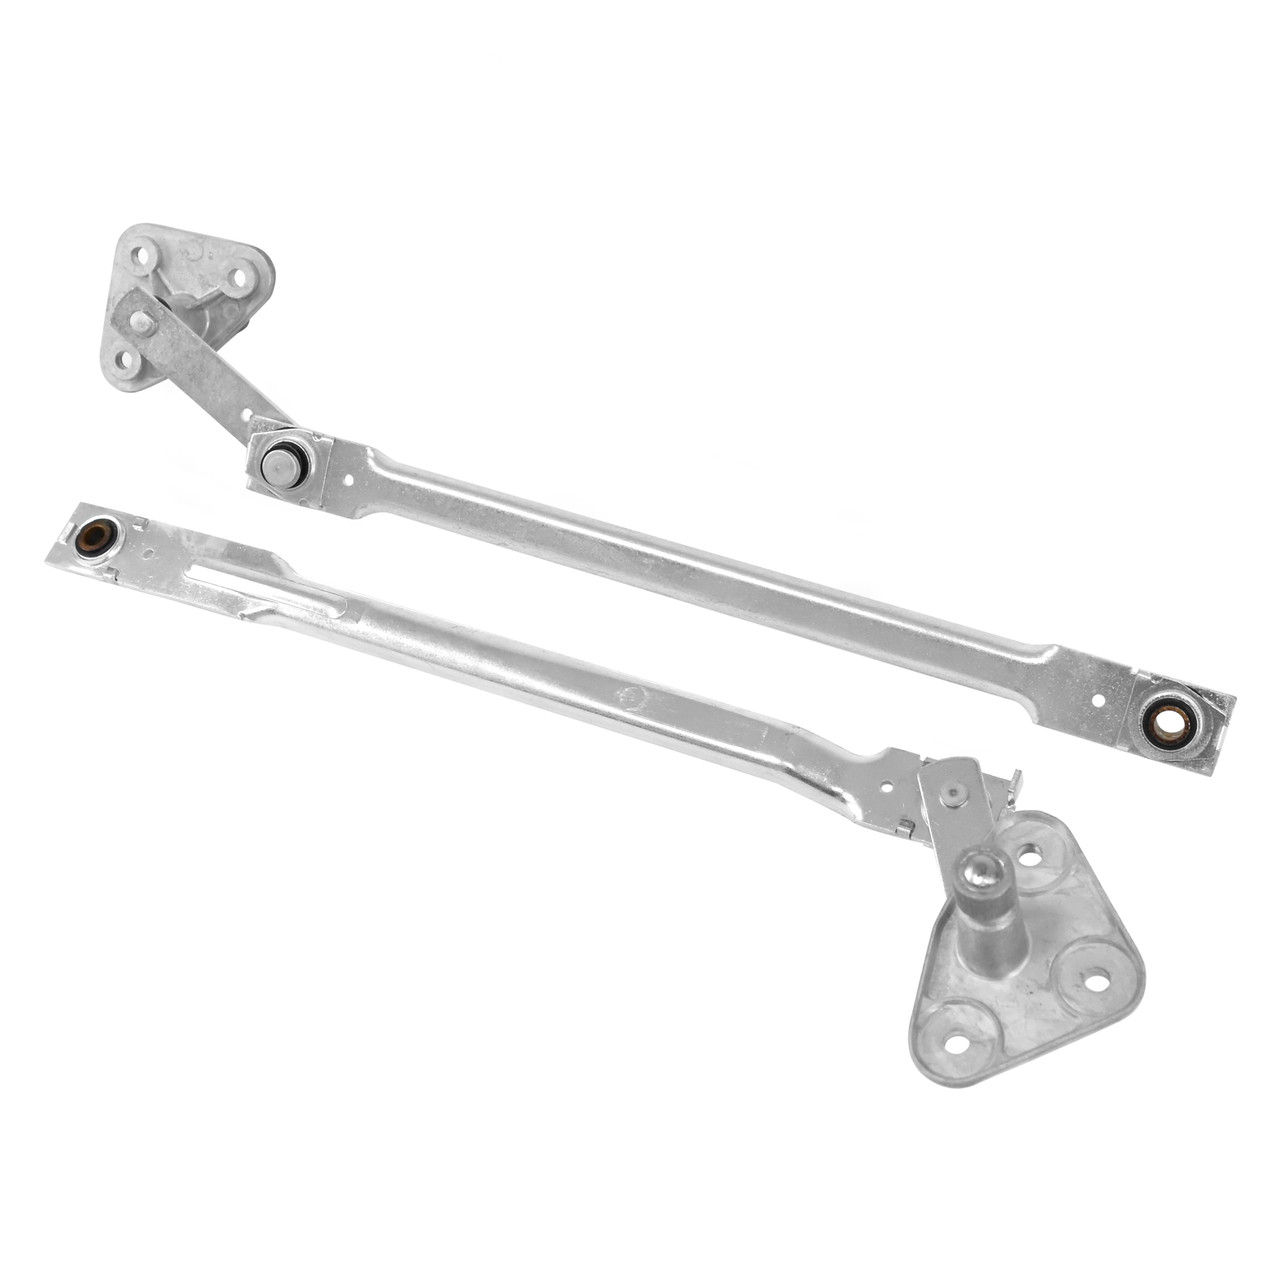 Windshield Wiper Transmission Arm Assembly Pair From 5/3/1965 [FM-EW005]